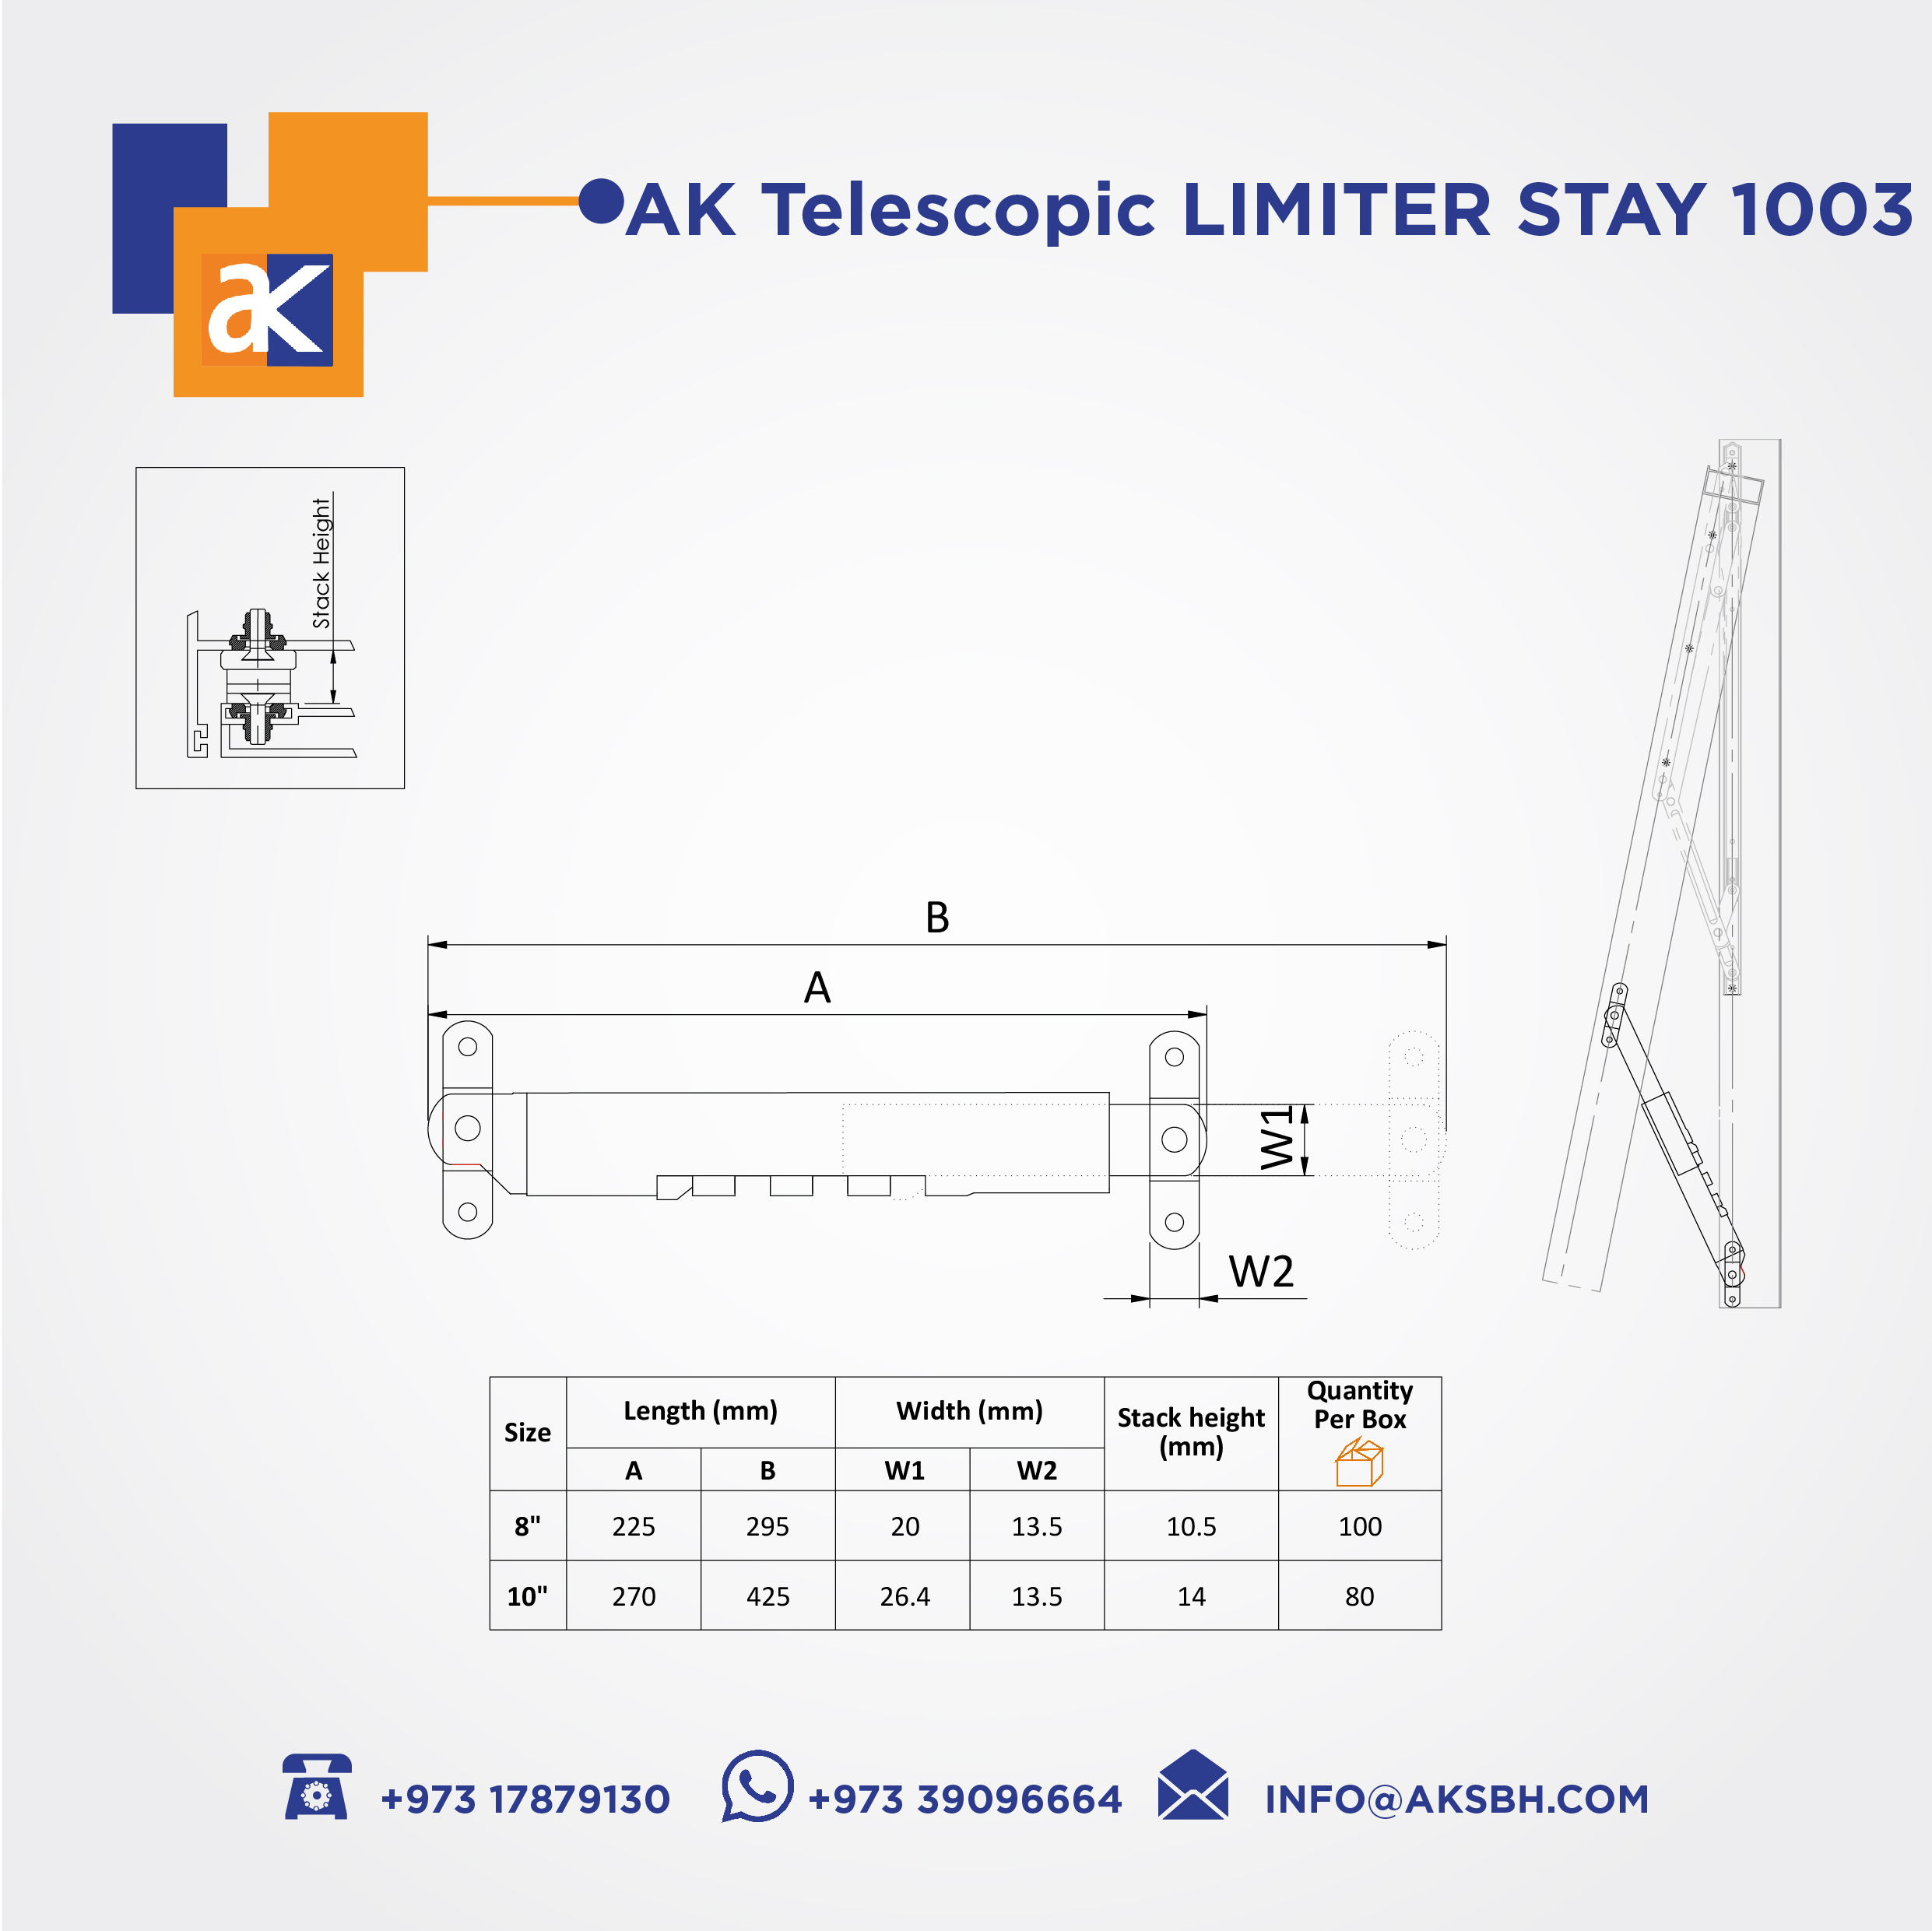 Telescopic LIMITER STAY 1003 by AK